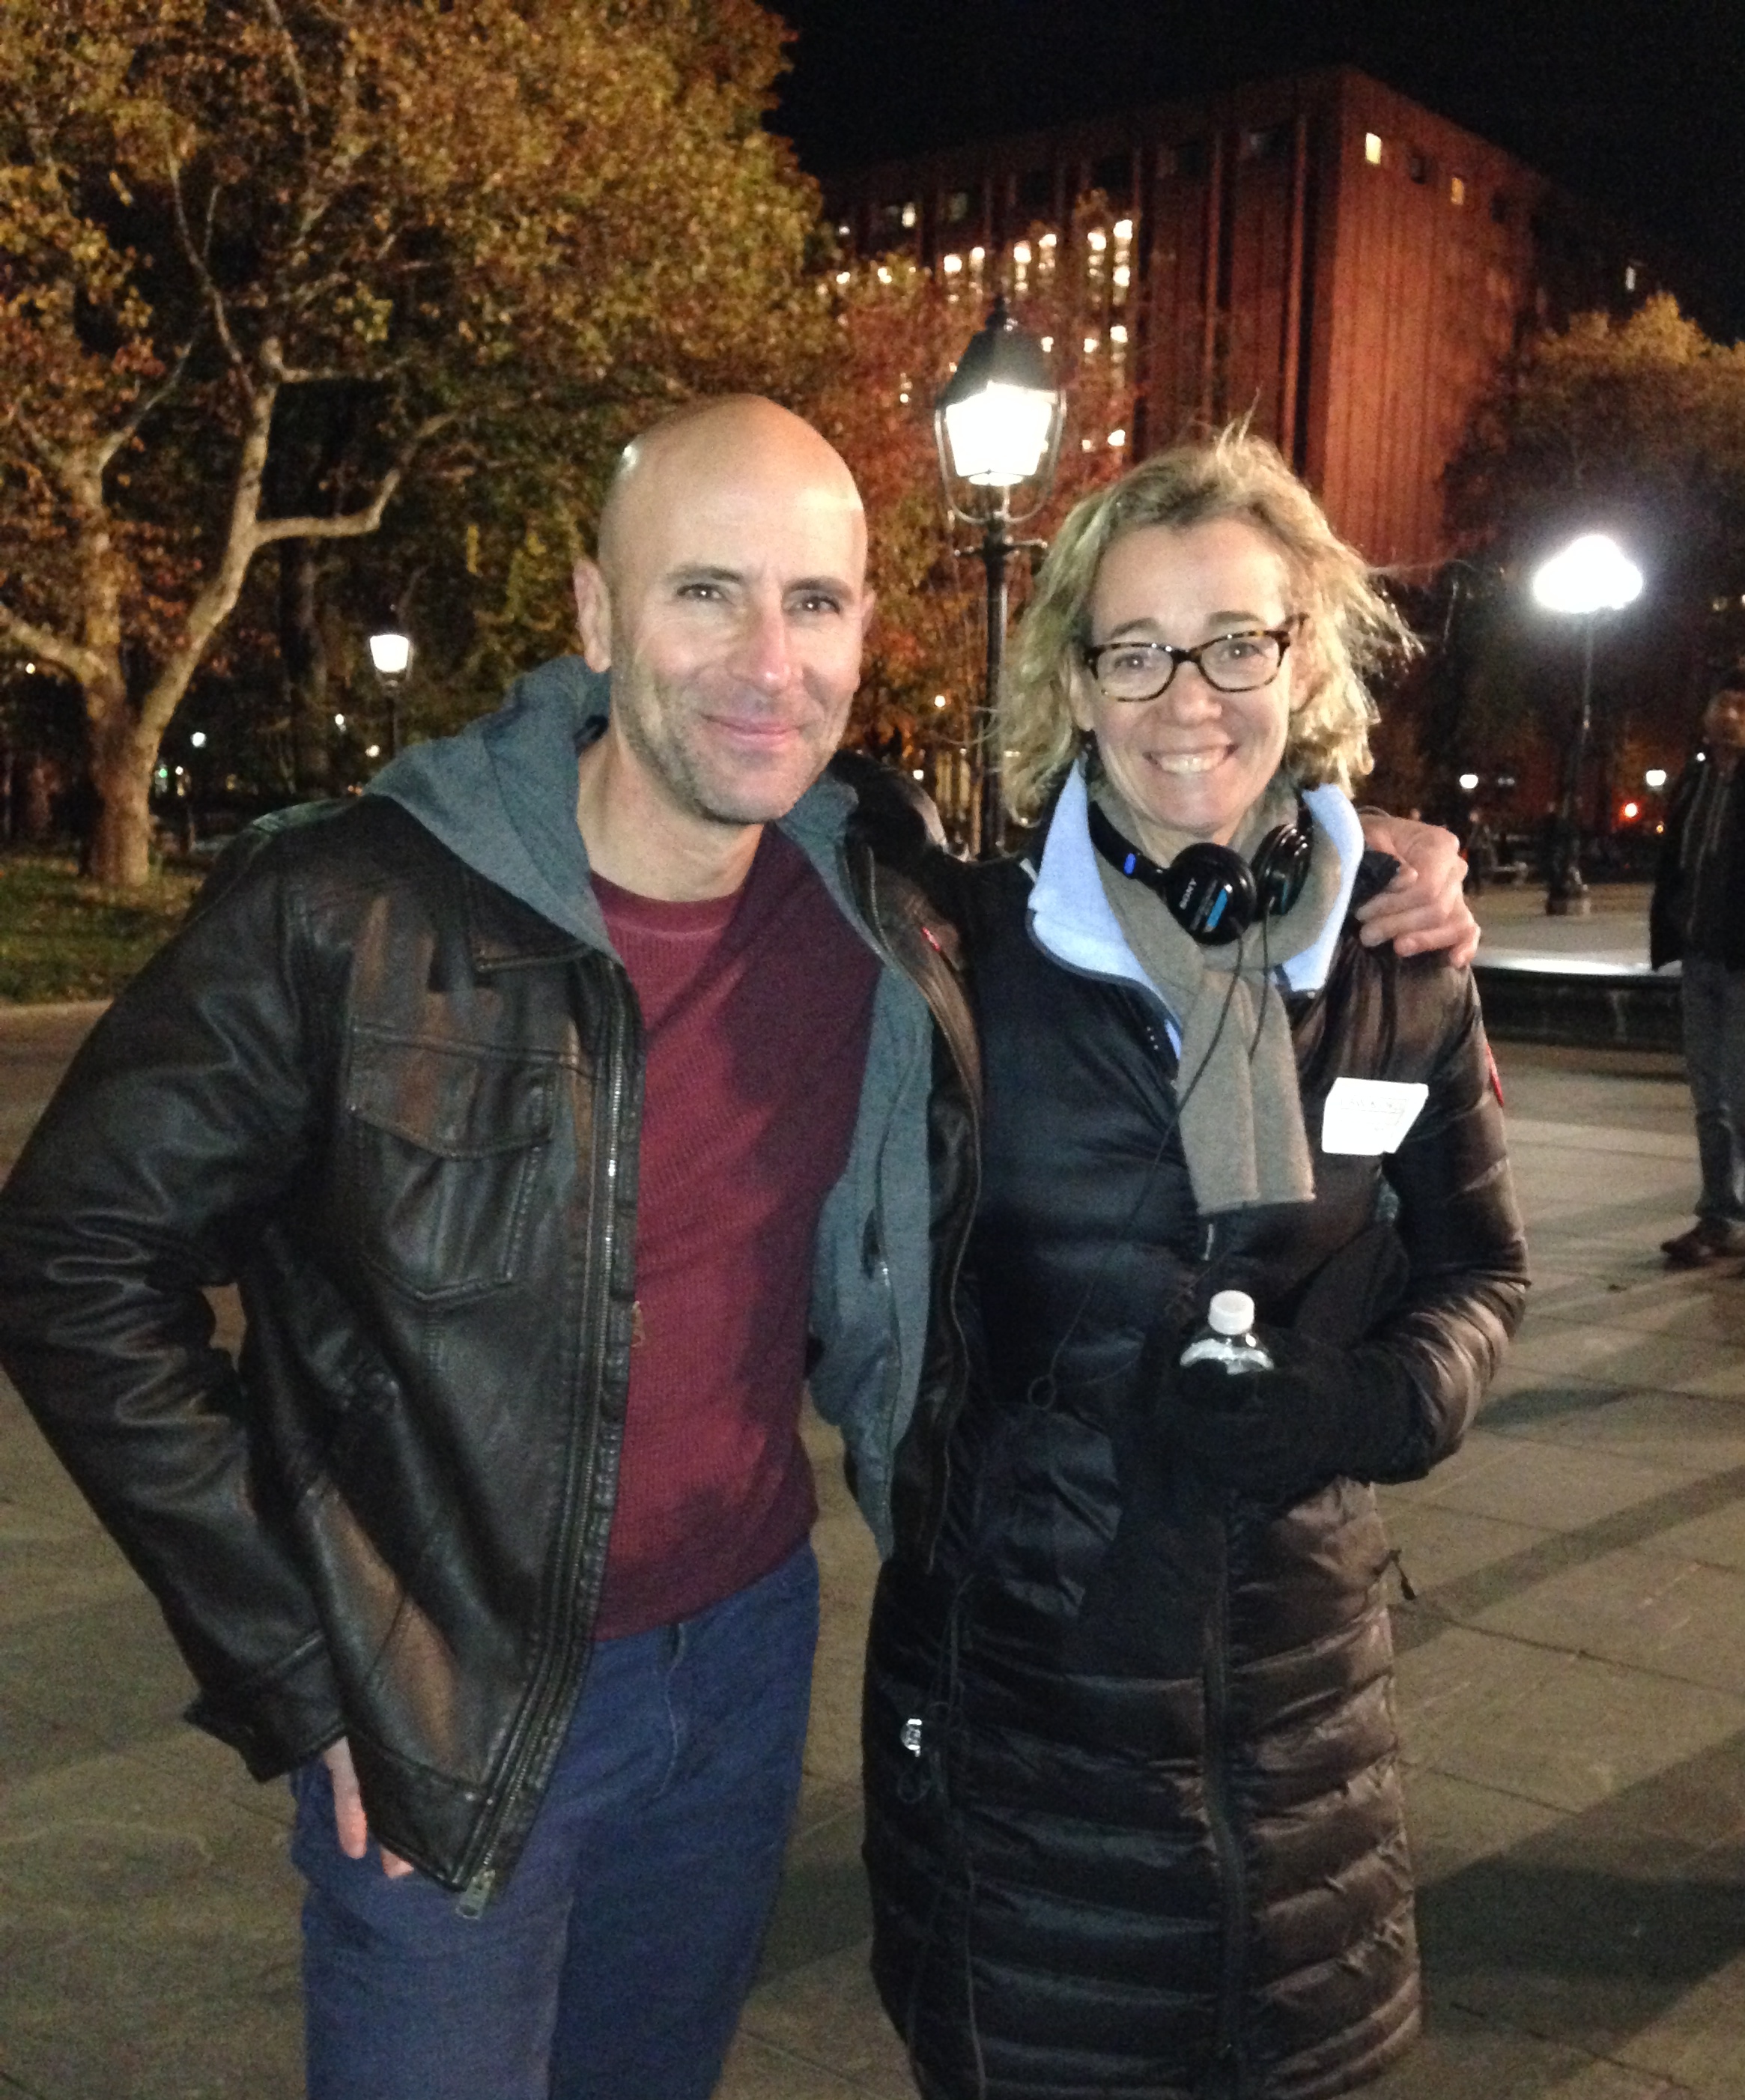 Jordan Lage on location with director Martha Mitchell in Washington Square Park for LAW & ORDER: SVU (2014).